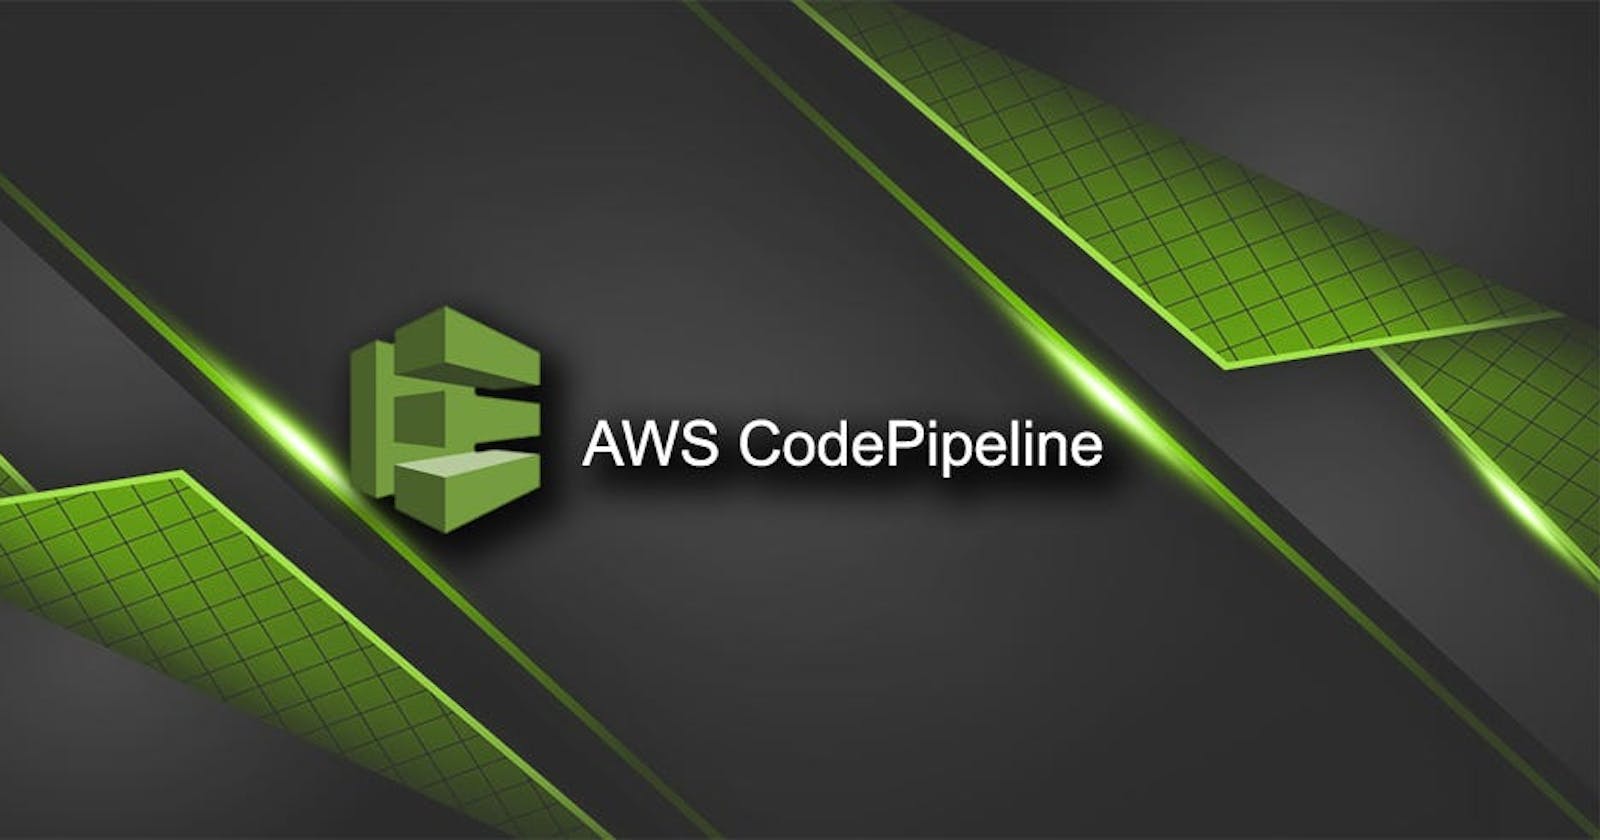 Day 53 - AWS CodePipeline